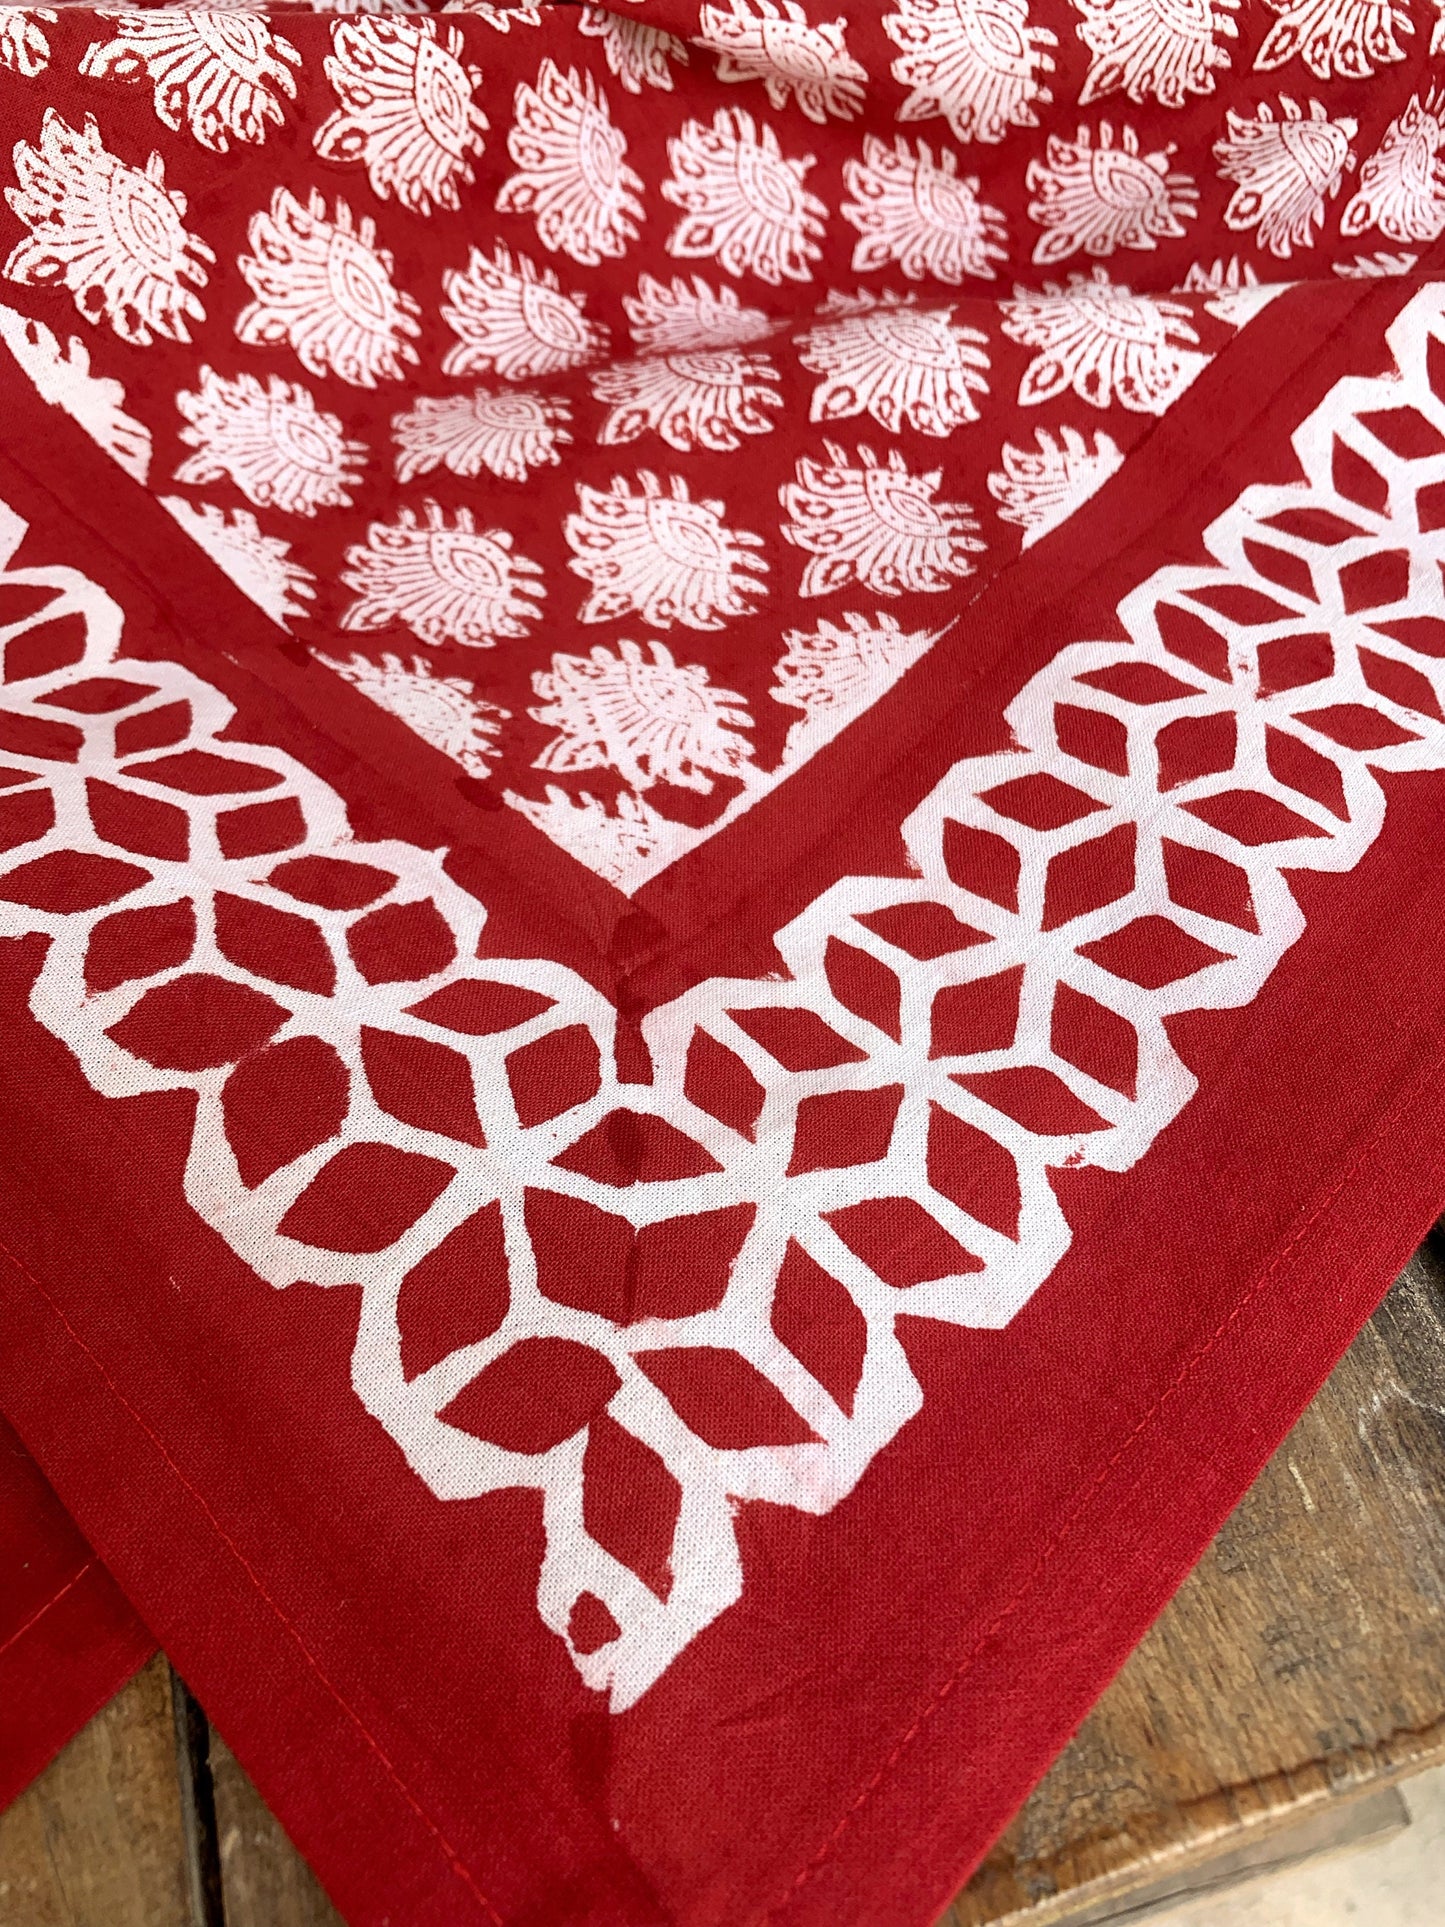 Pure cotton block print tablecloth handmade in India · Six diners · Boho chic tablecloth 100% Indian cotton · Red lotus flower